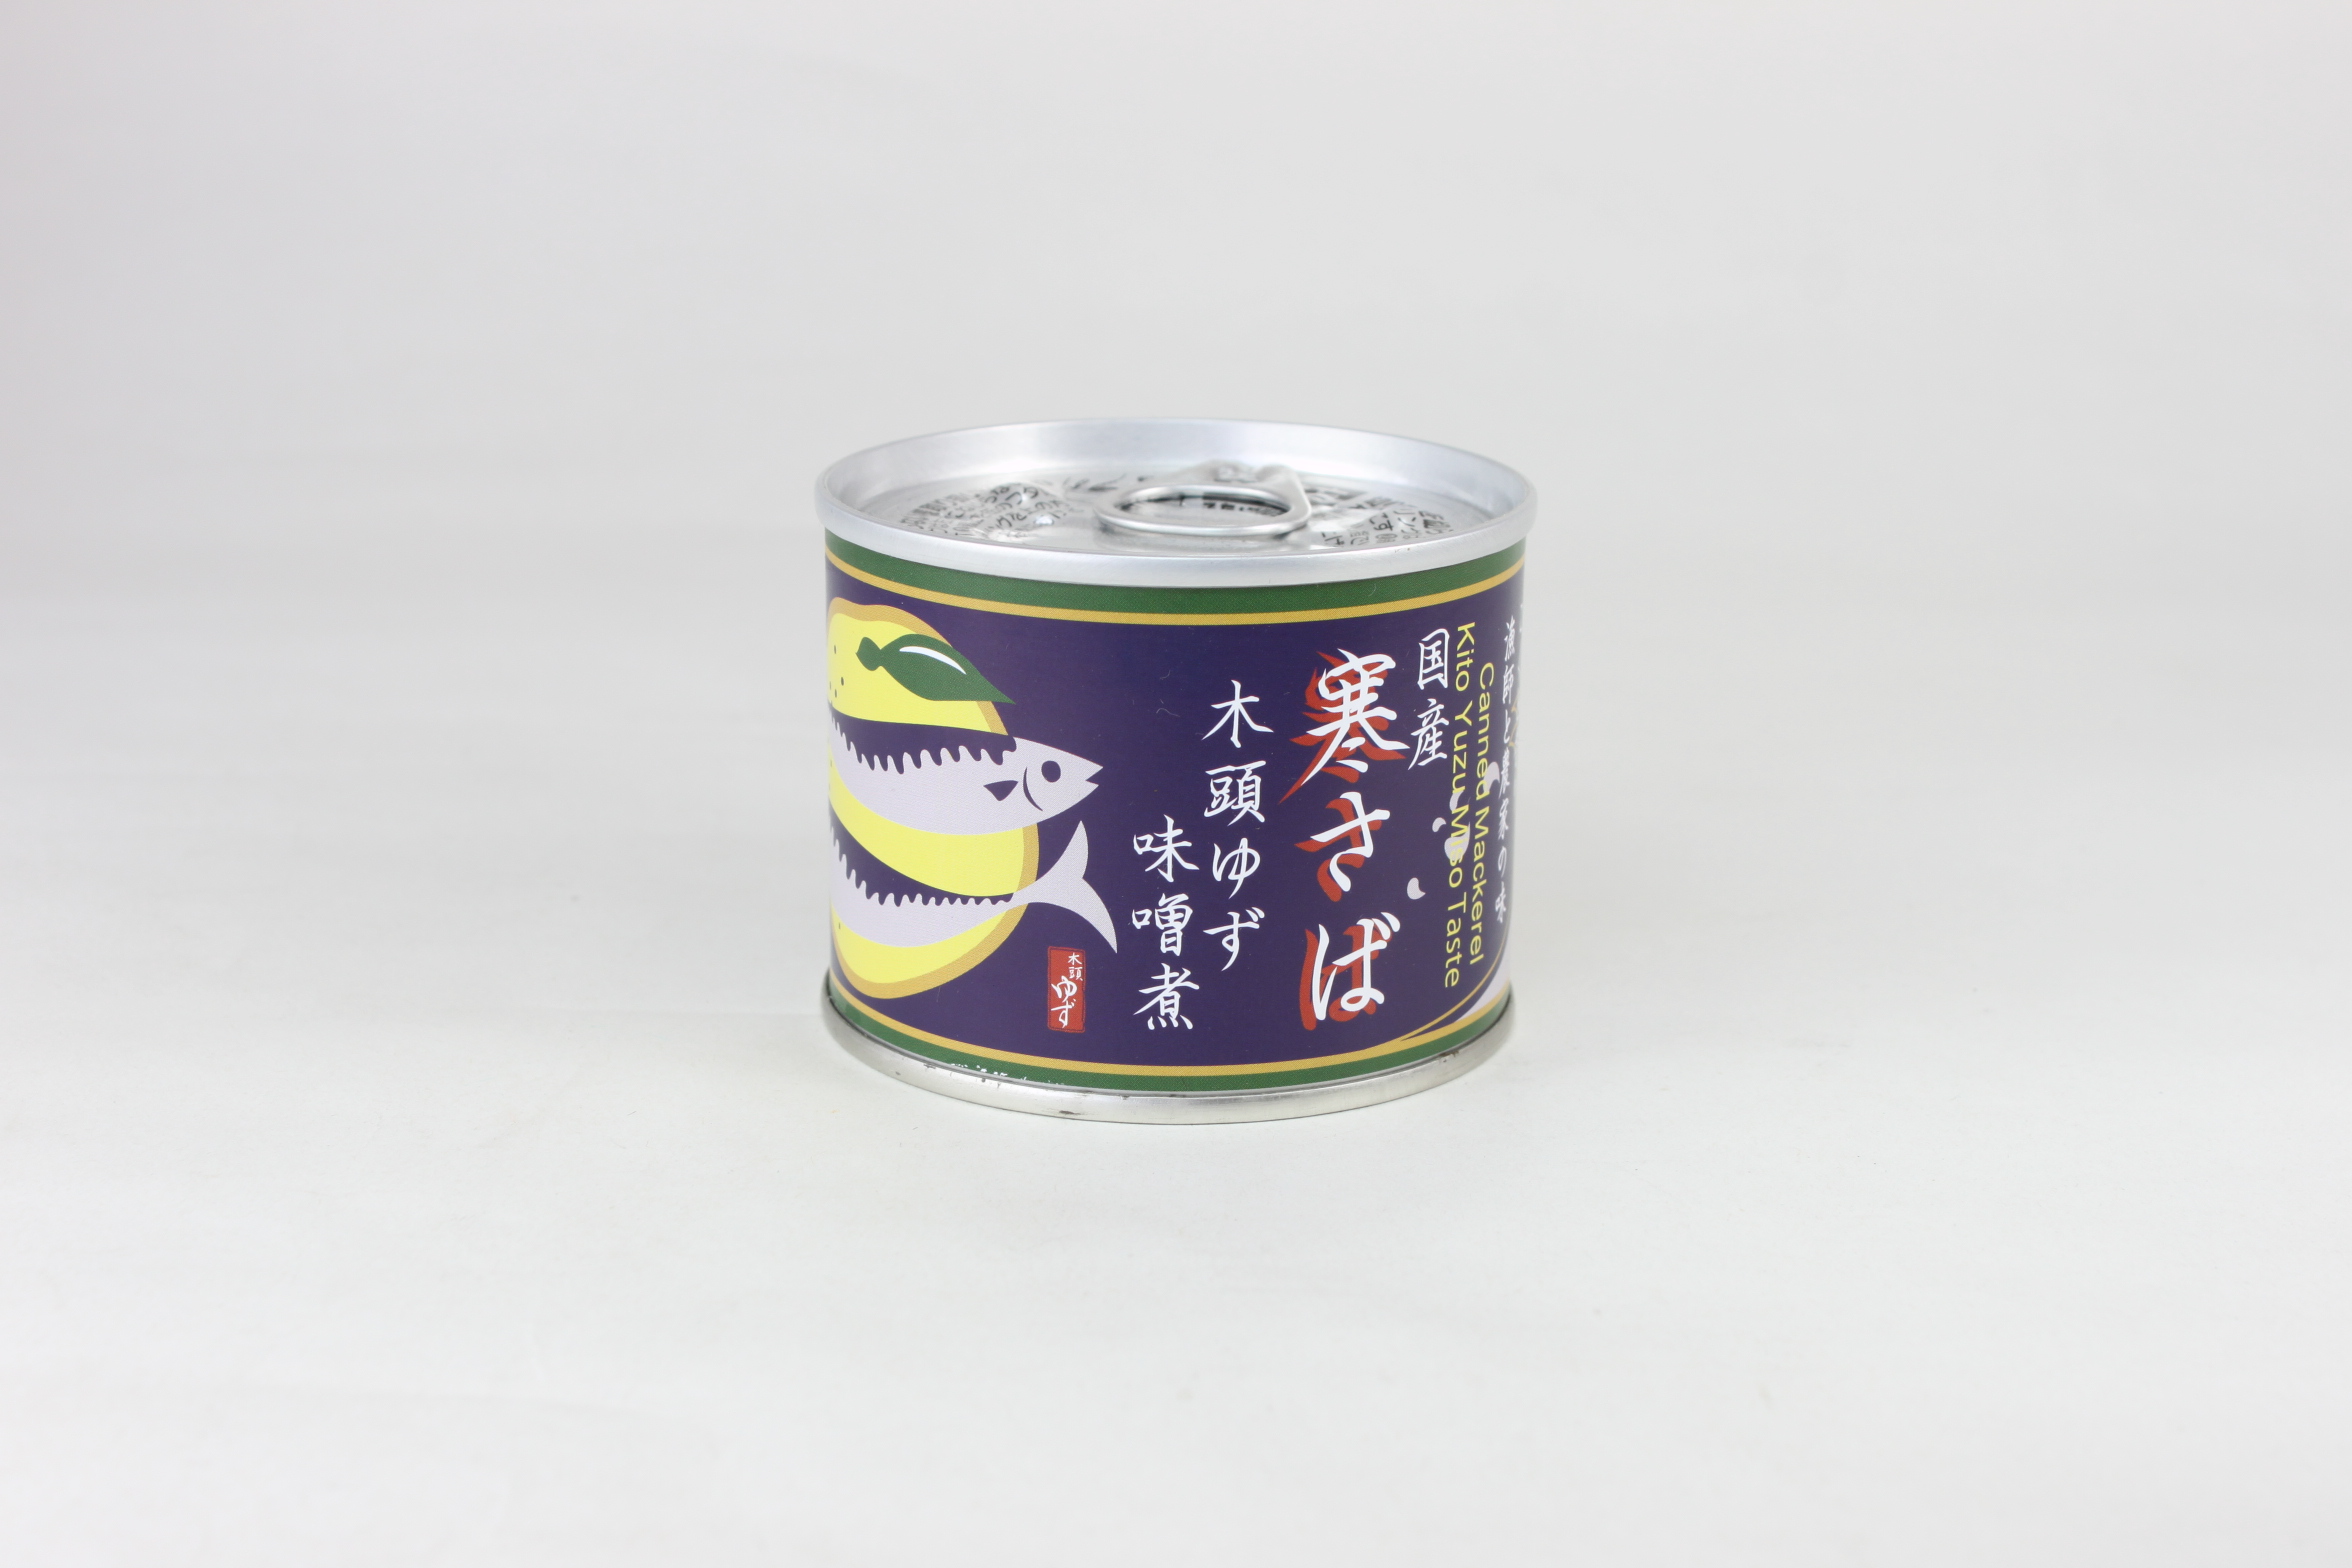 simmered　–　寒さば　Yuzu　citrys/Japan　Miso　木頭ゆず味噌煮/Mackerel　with　in　倉日用商店